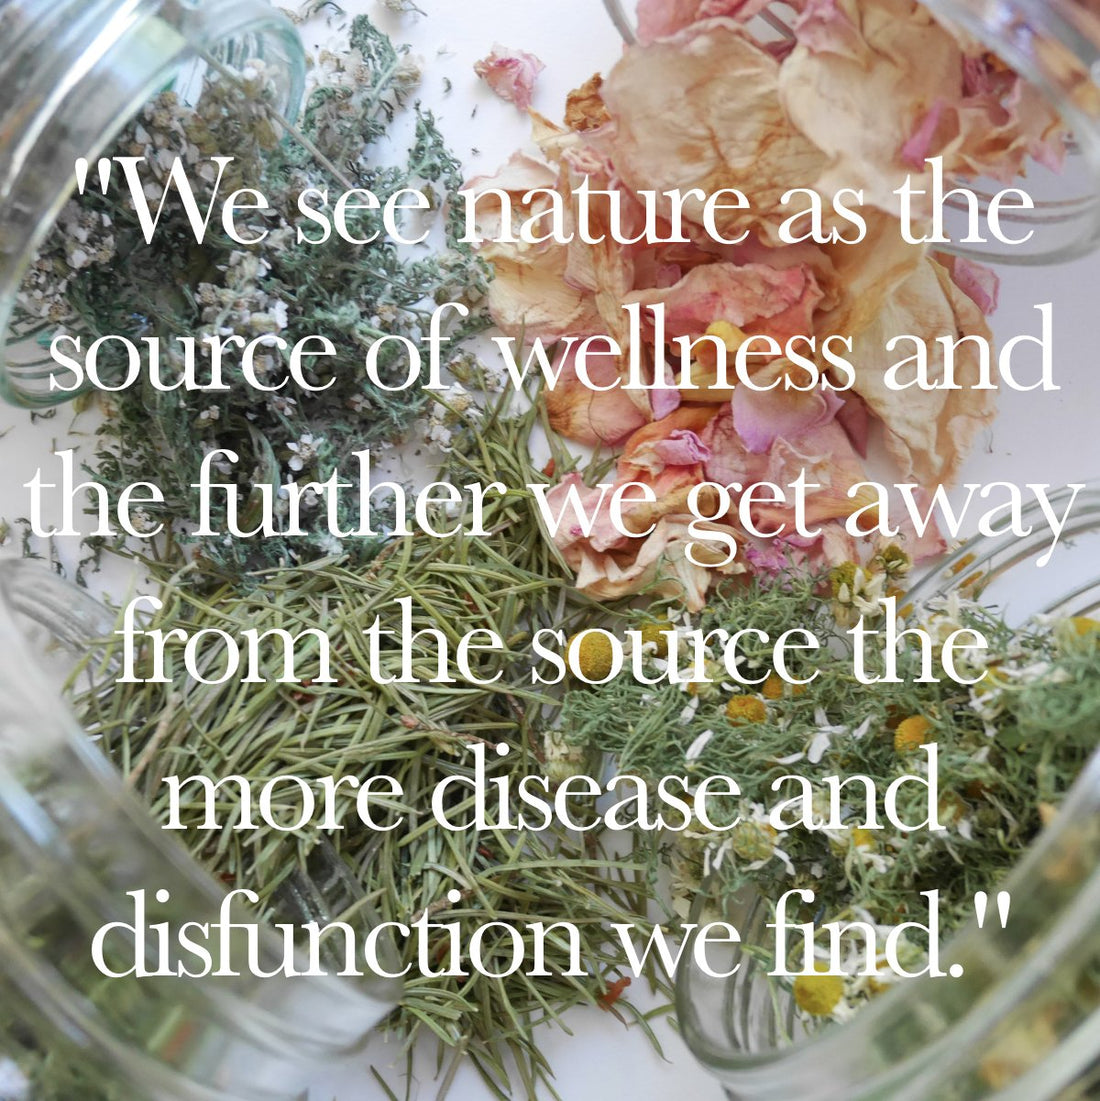 Nature Based Self Care : Holistic Perspectives, Pure Sourcing, and Whole Plants - Deschampsia - Nature Based Self Care